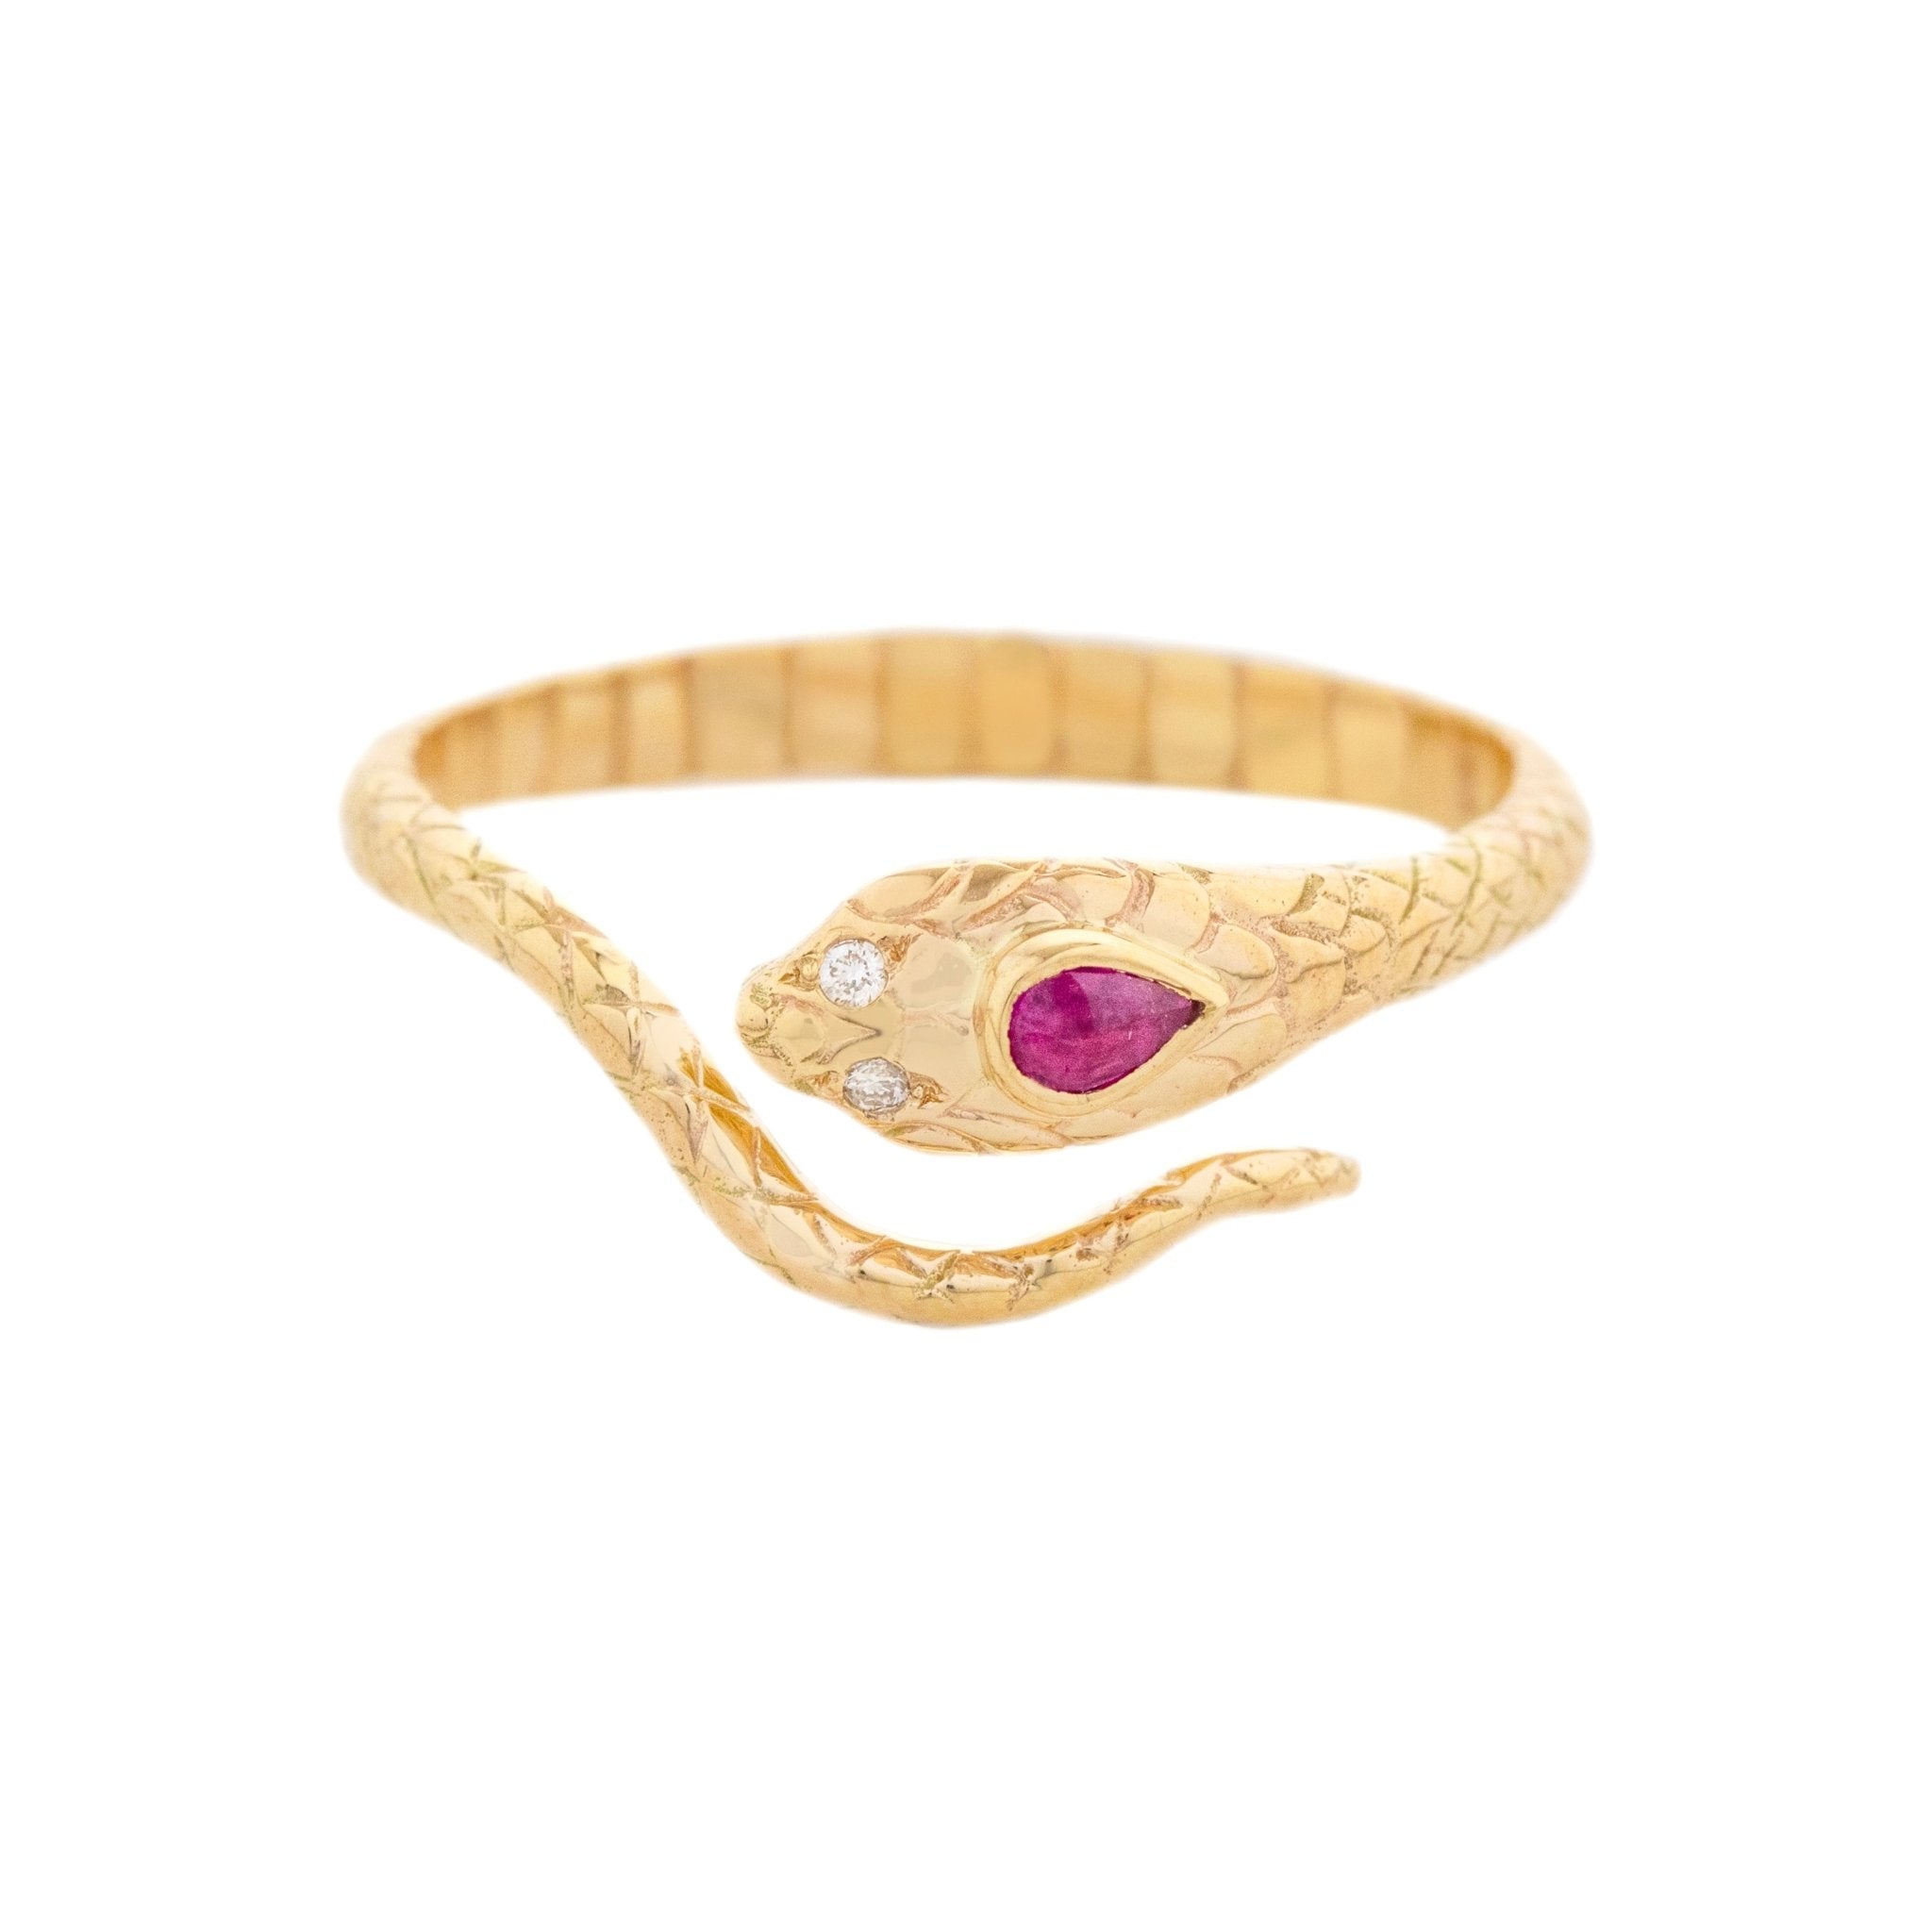 Gold Engraved "Cobra" Ring with Ruby & Diamonds - Peridot Fine Jewelry - Celine Daoust